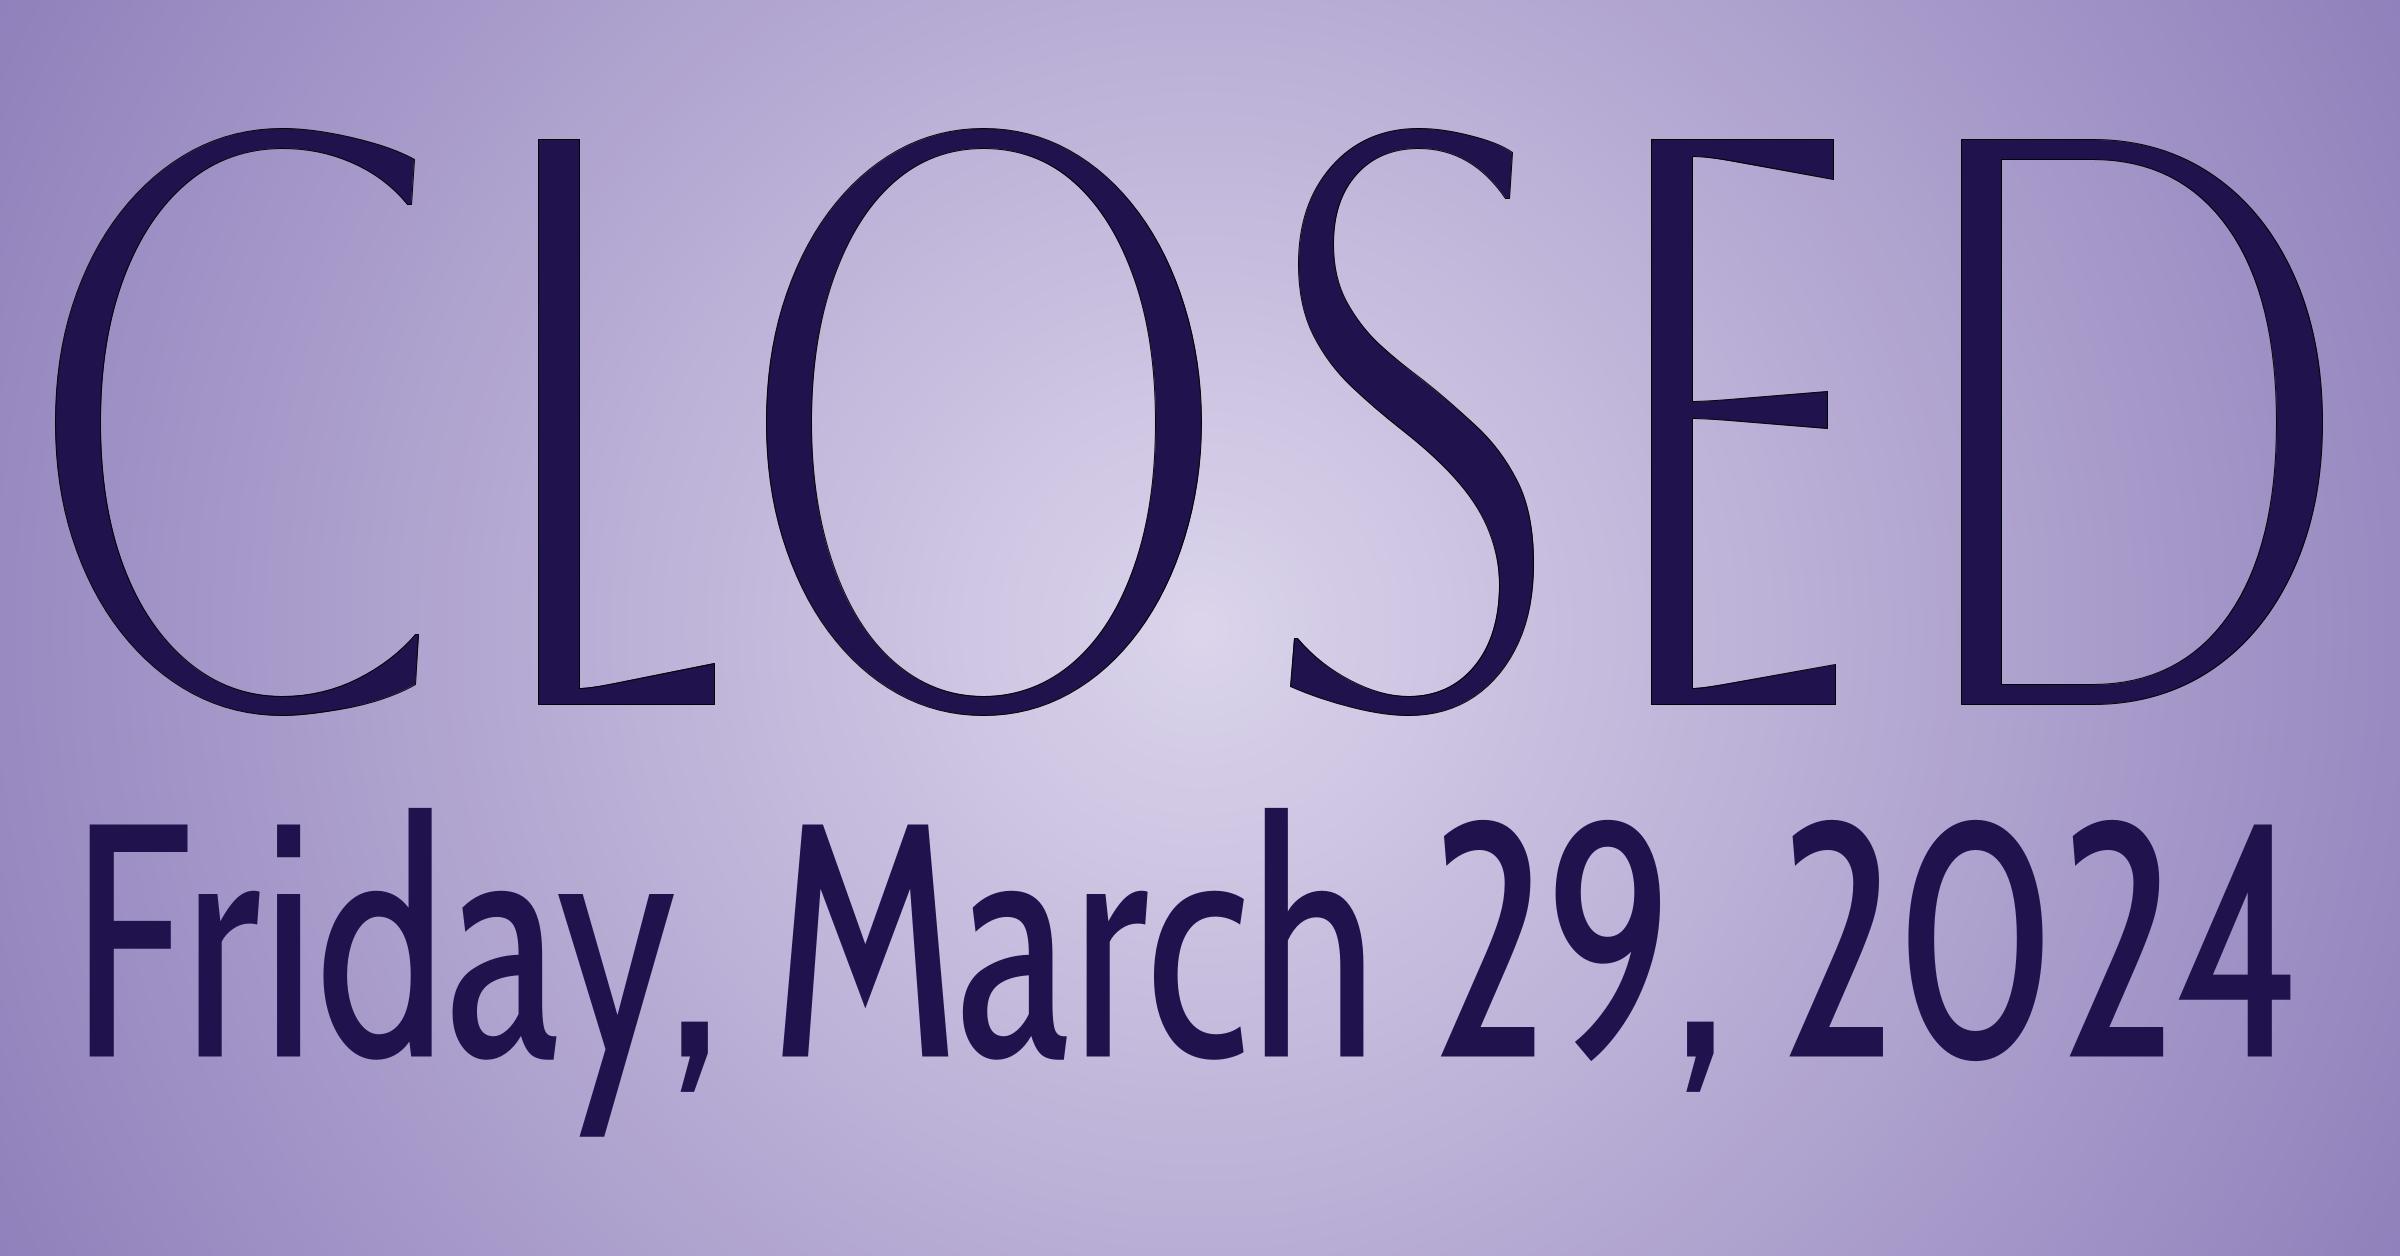 Closed Friday, March 29, 2024